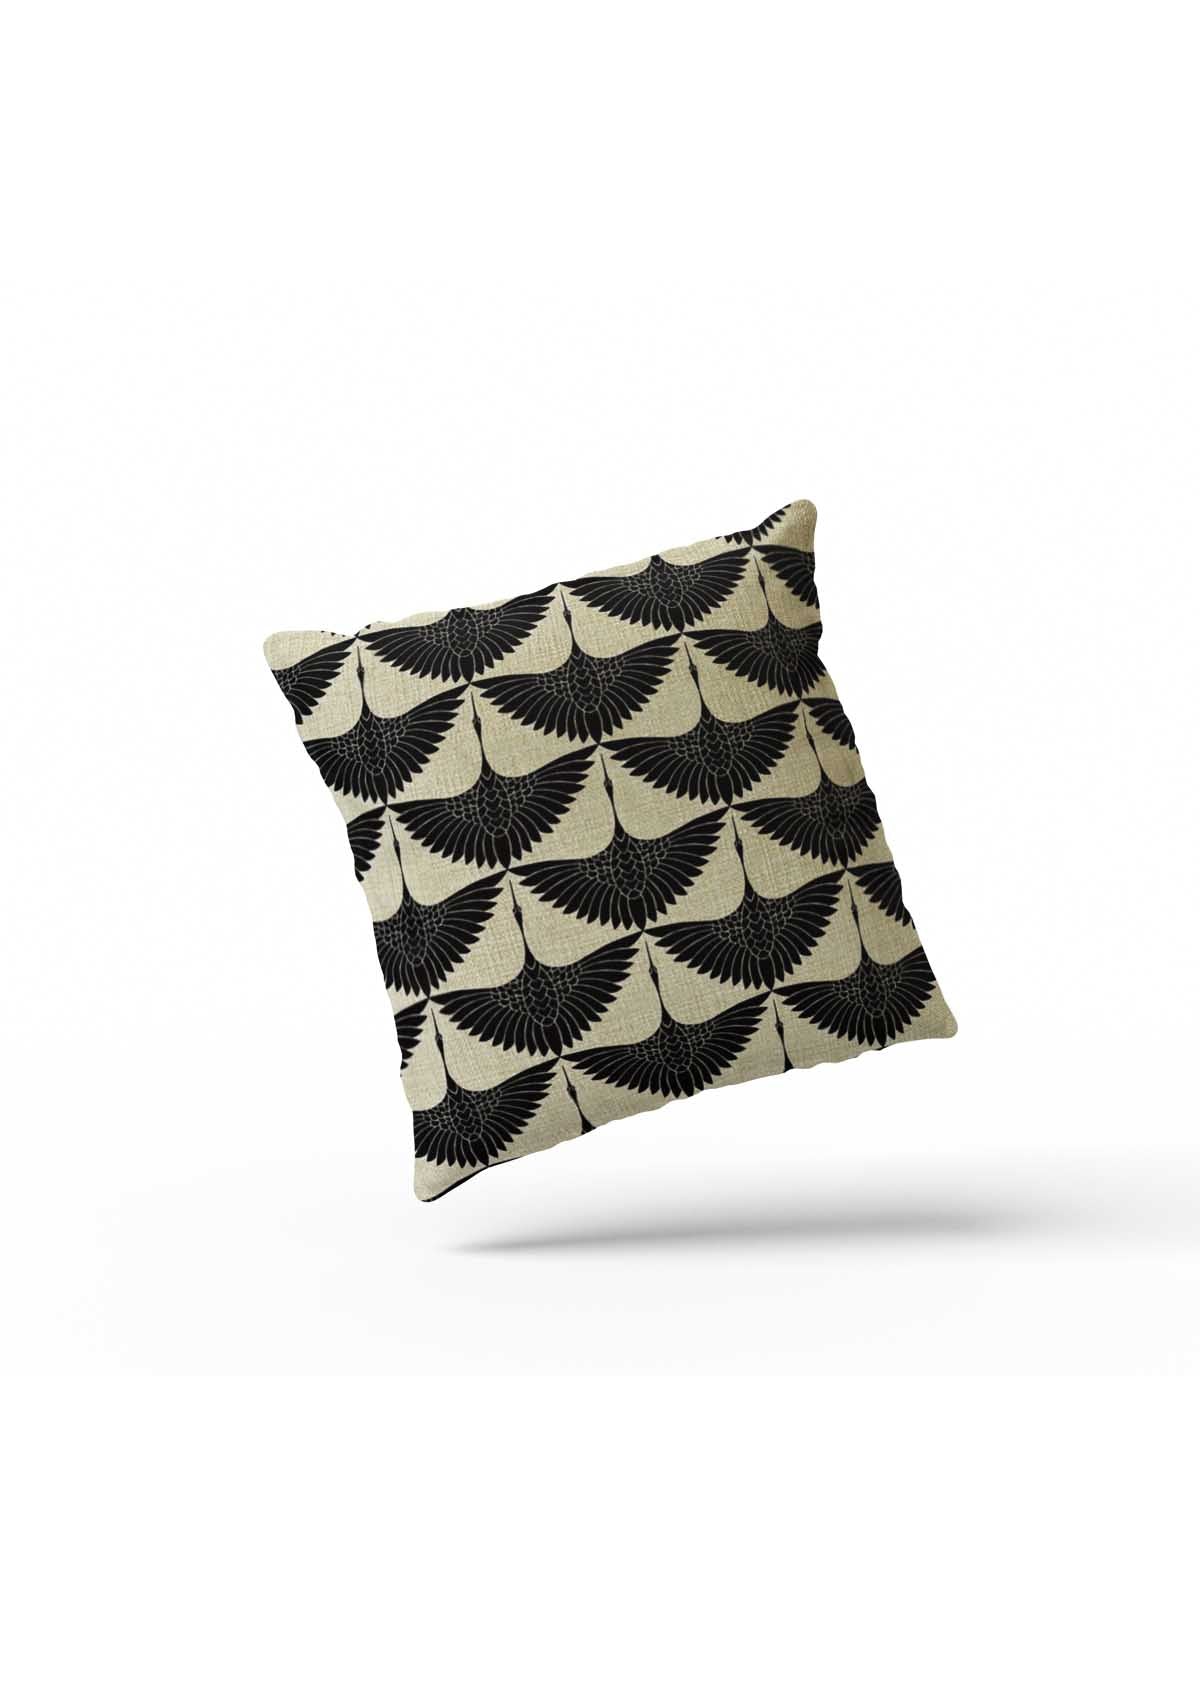 India's Black and White "Finest" Cushion Covers